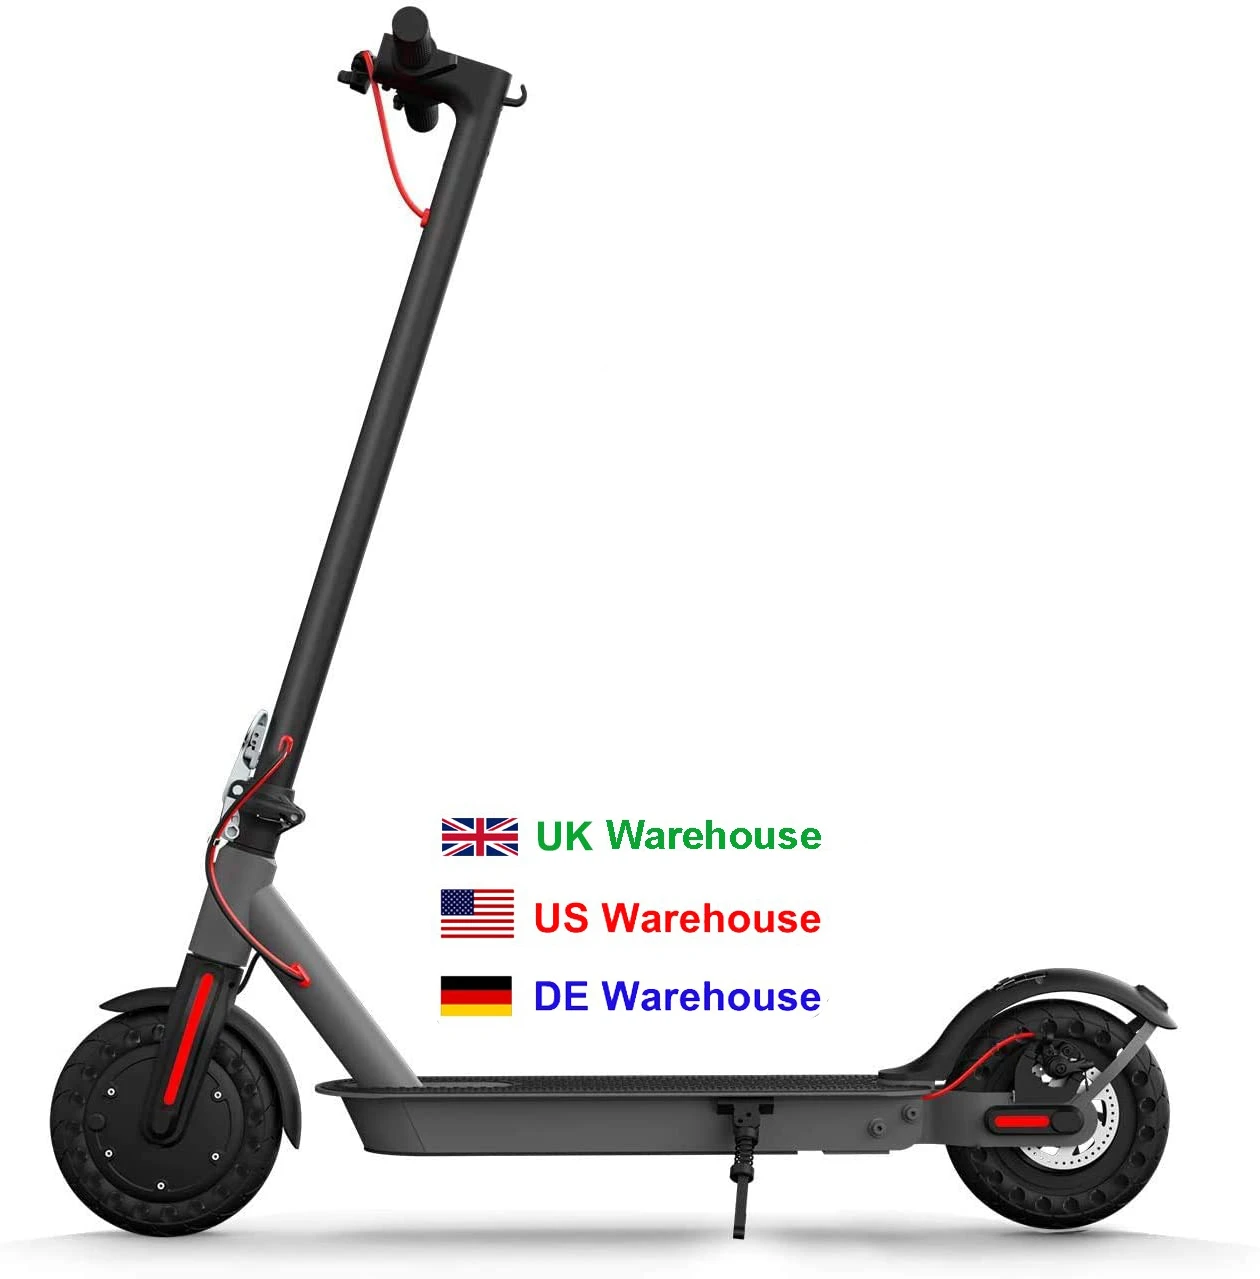 

K2-088 Battery Power EU Warehouse Cheap Stand Up Two 2 Wheels Folding Foldable Adult E Electric Kick Scooters for sale